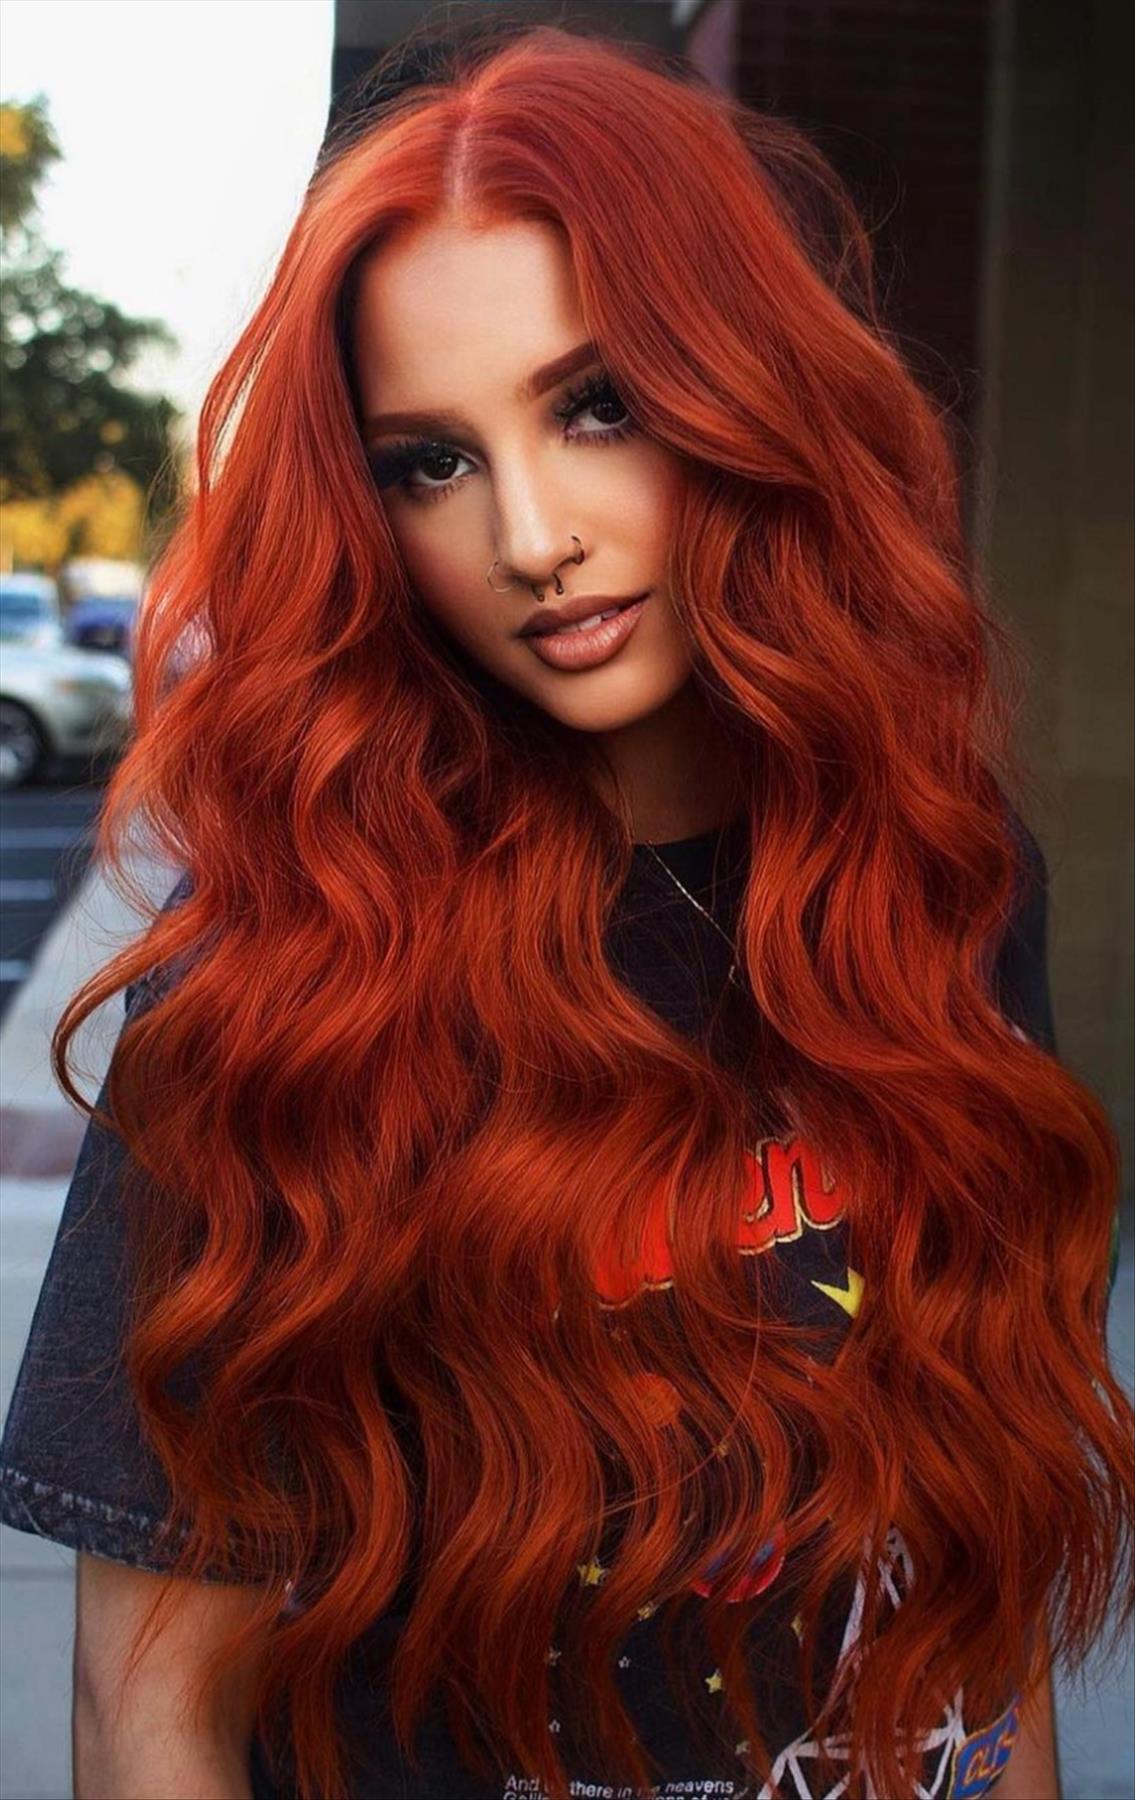 Fabulous red hair color for Fall hair color inspiration